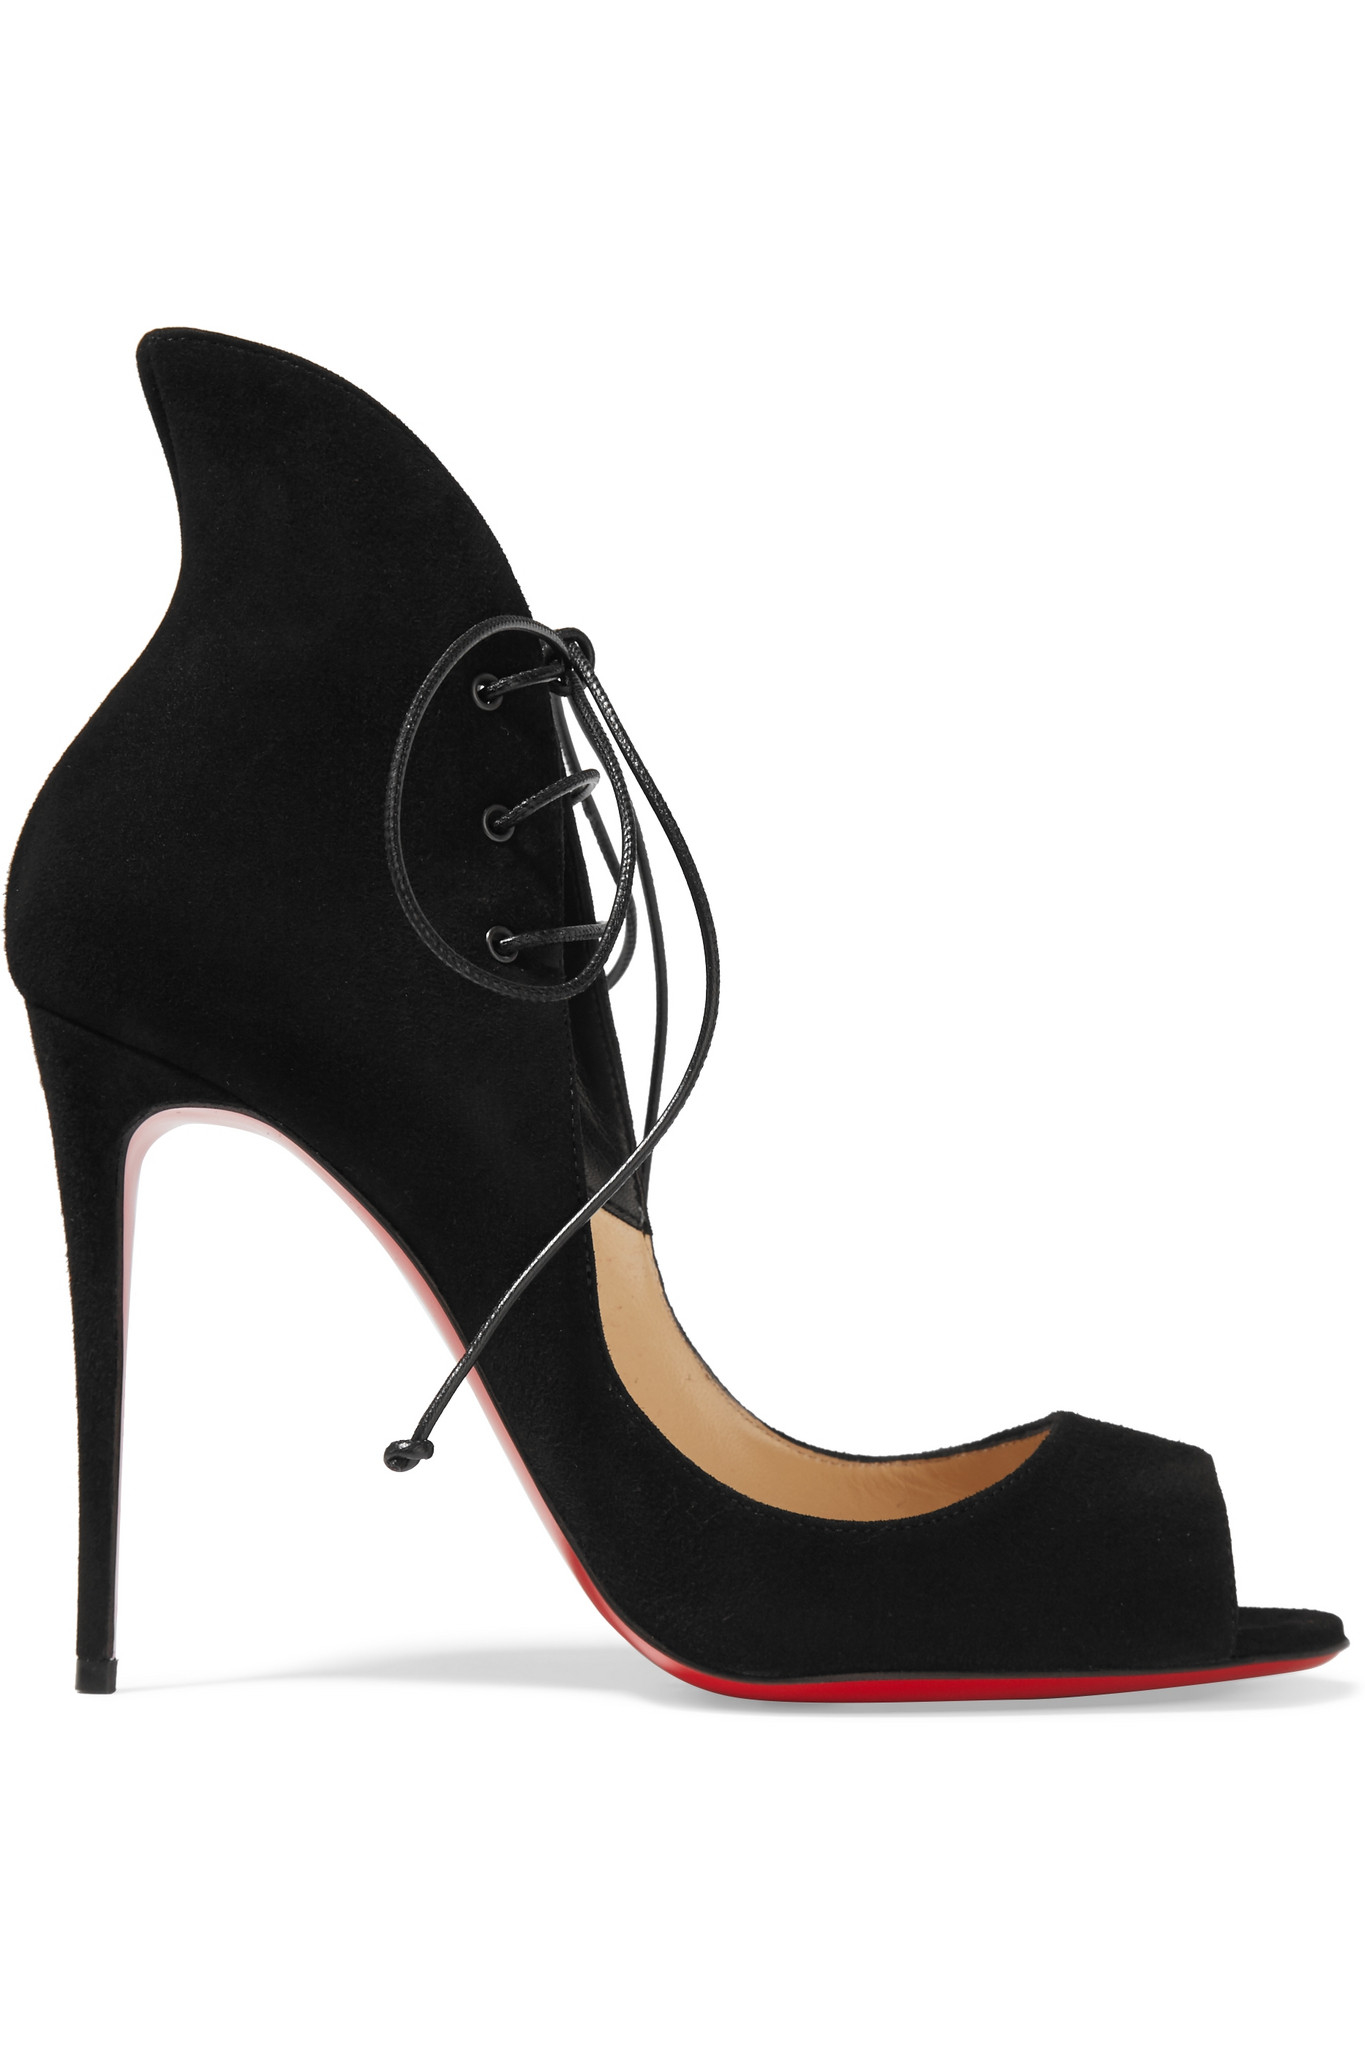 Christian louboutin Megavamp 100 Suede Sandals in Black | Lyst